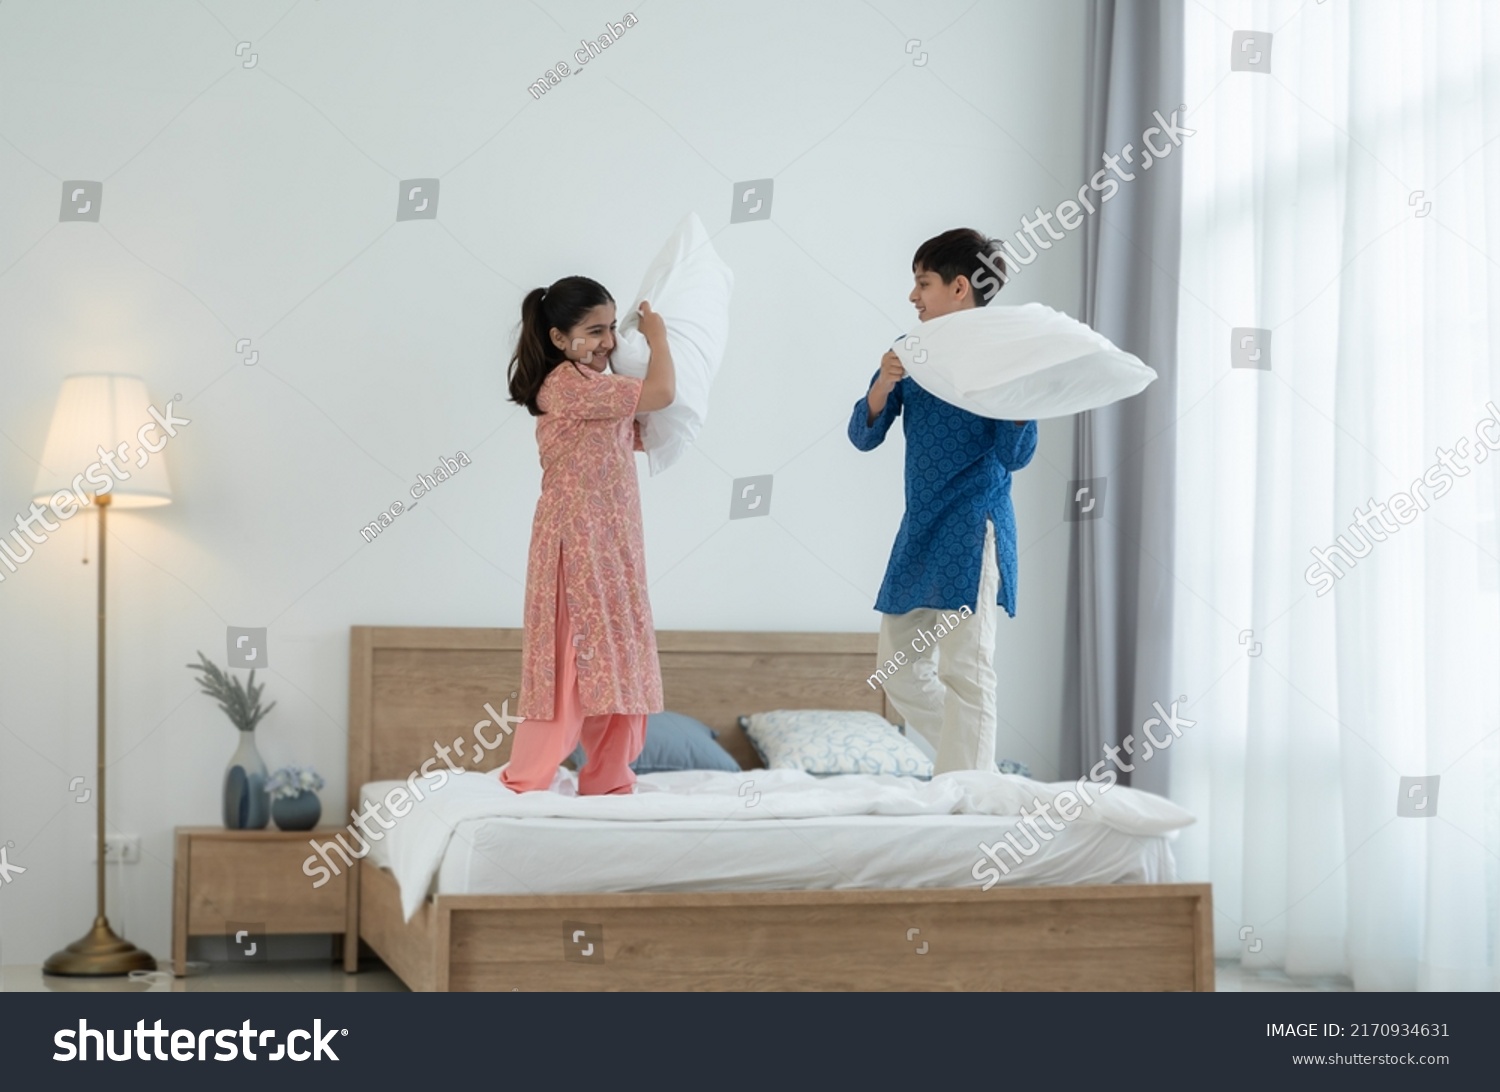 Two happy Indian brother and sister in traditional clothing standing on bed, playing pillow fight, having fun together at home. Playful kids, Siblings relationship concept #2170934631